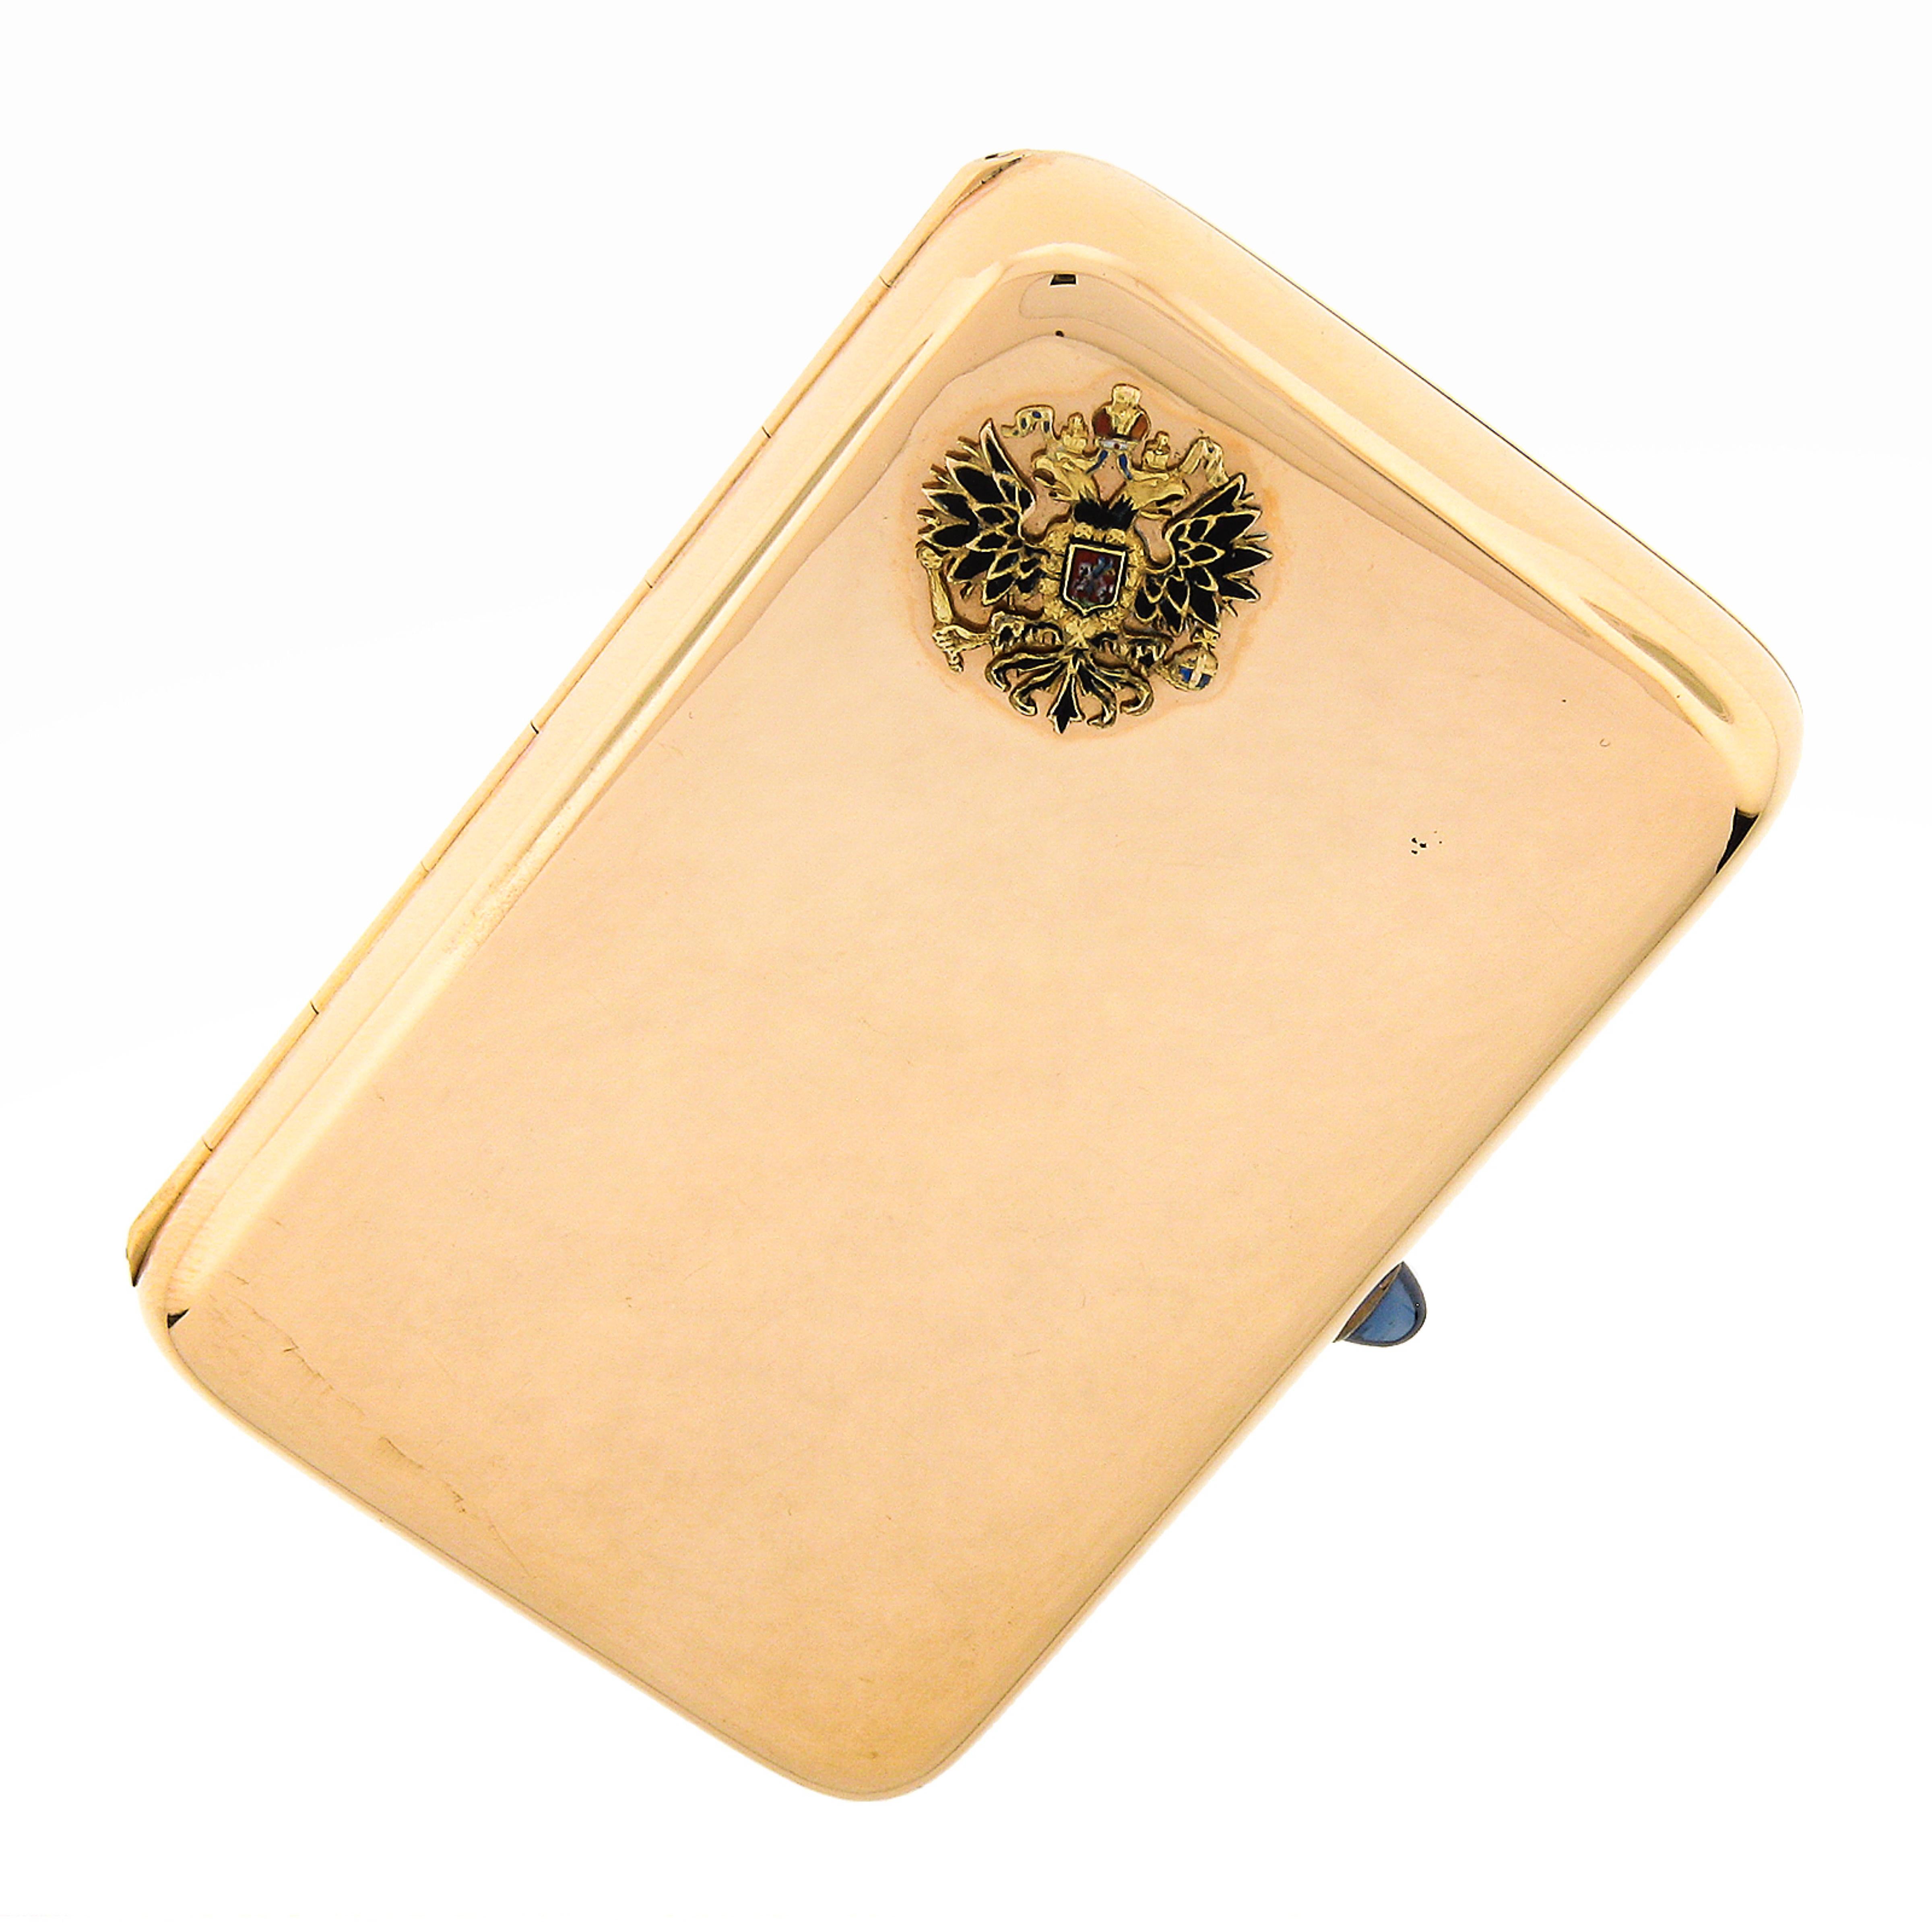 This incredibly well crafted vintage cigarette gold box was crafted in Russia from solid 14k rosy yellow gold and features a large compartment which is revealed by lifting the sapphire adorned tab away from the high polished finish case. The front